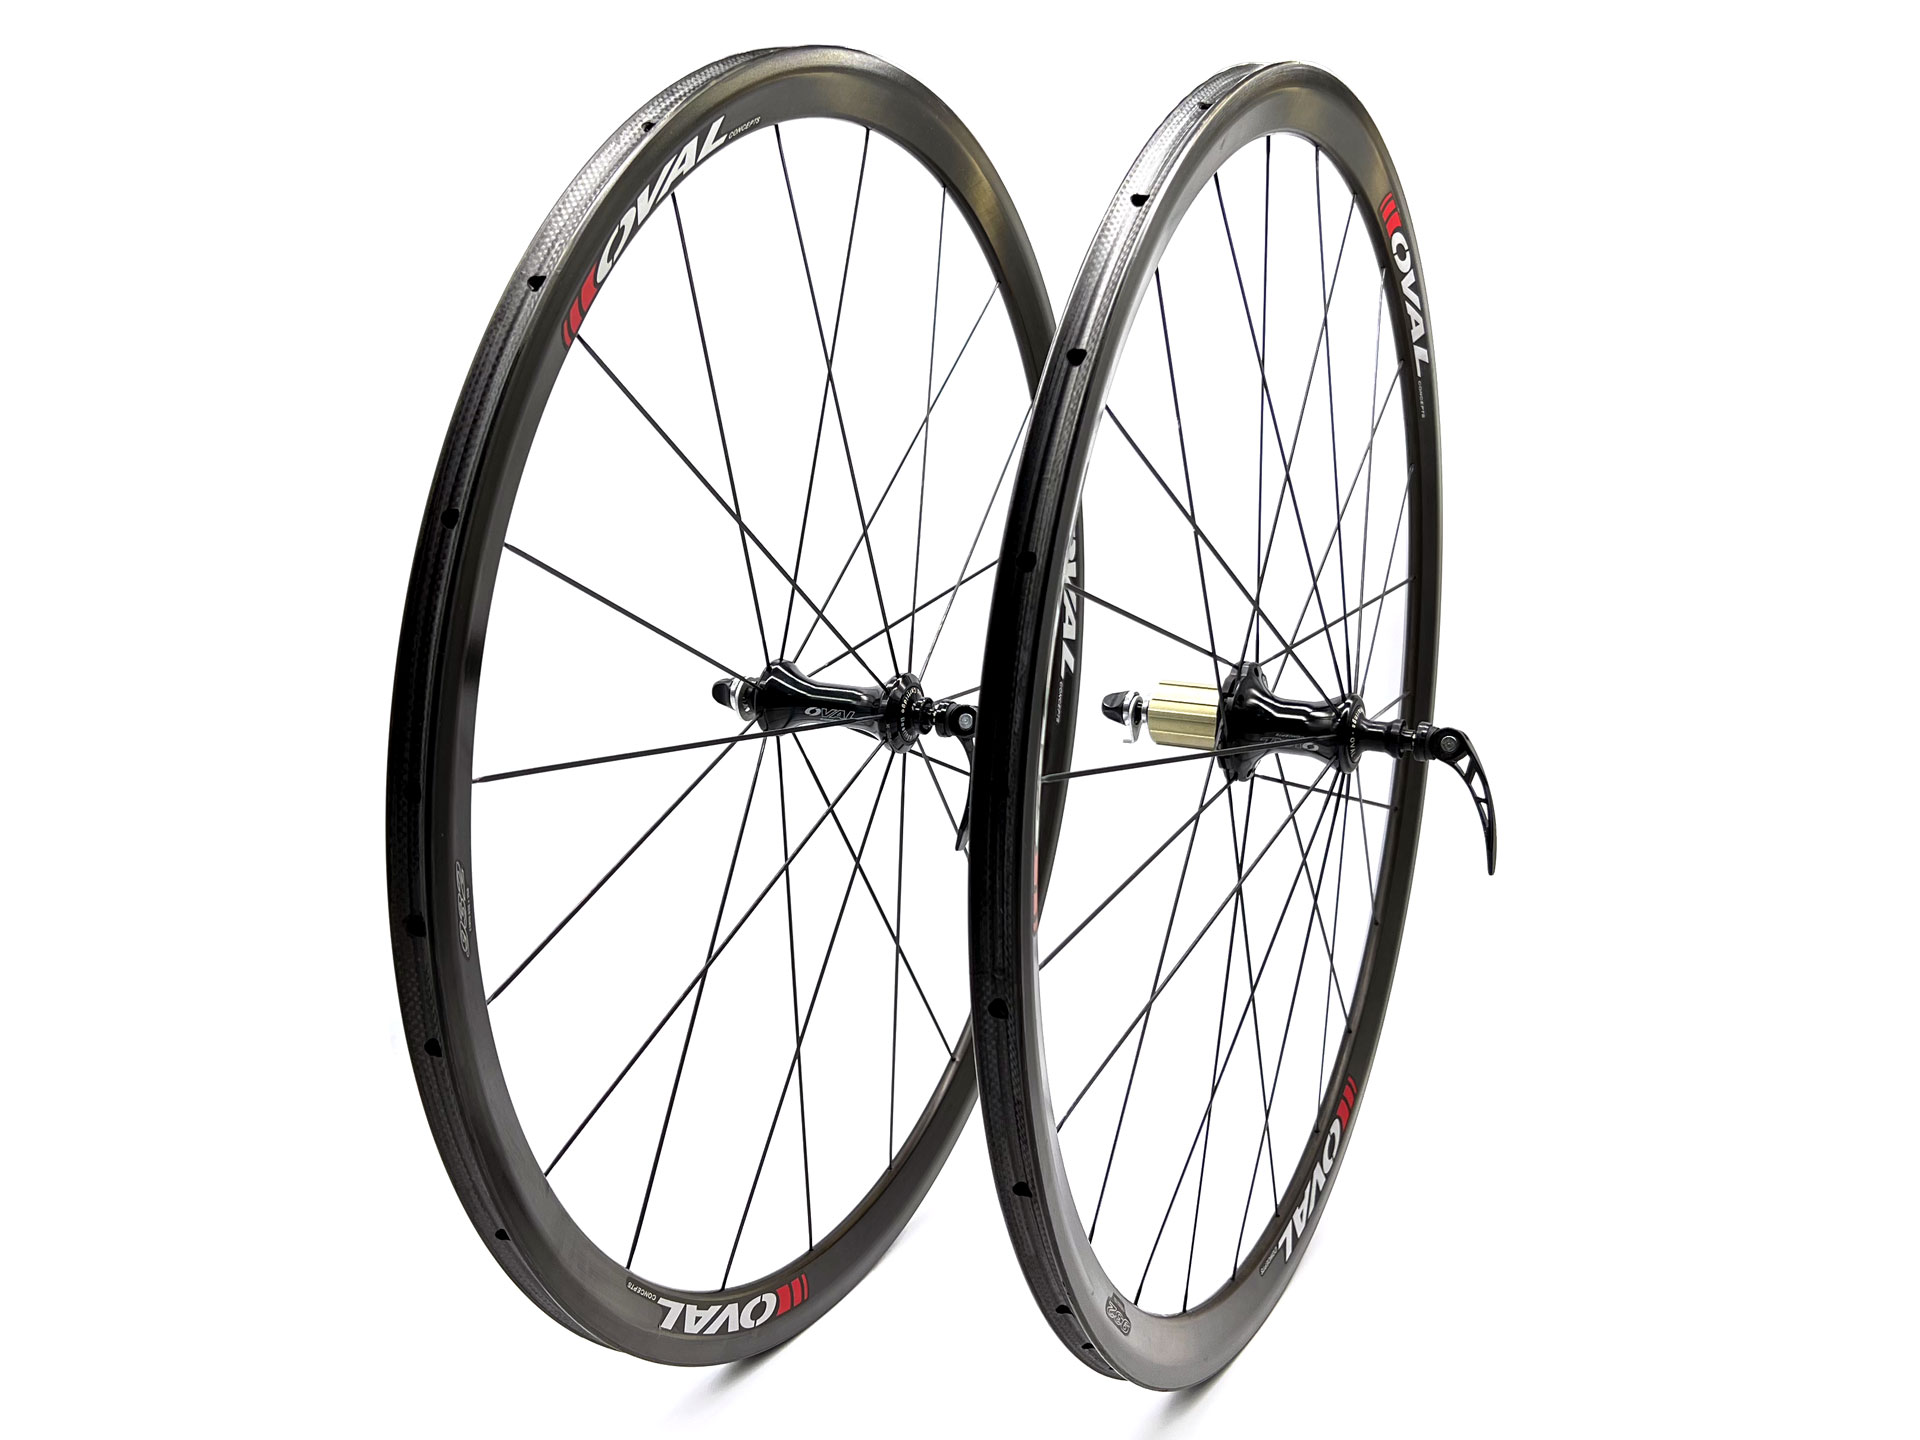 Oval Concepts 932 Tubular Carbon Road Wheelset